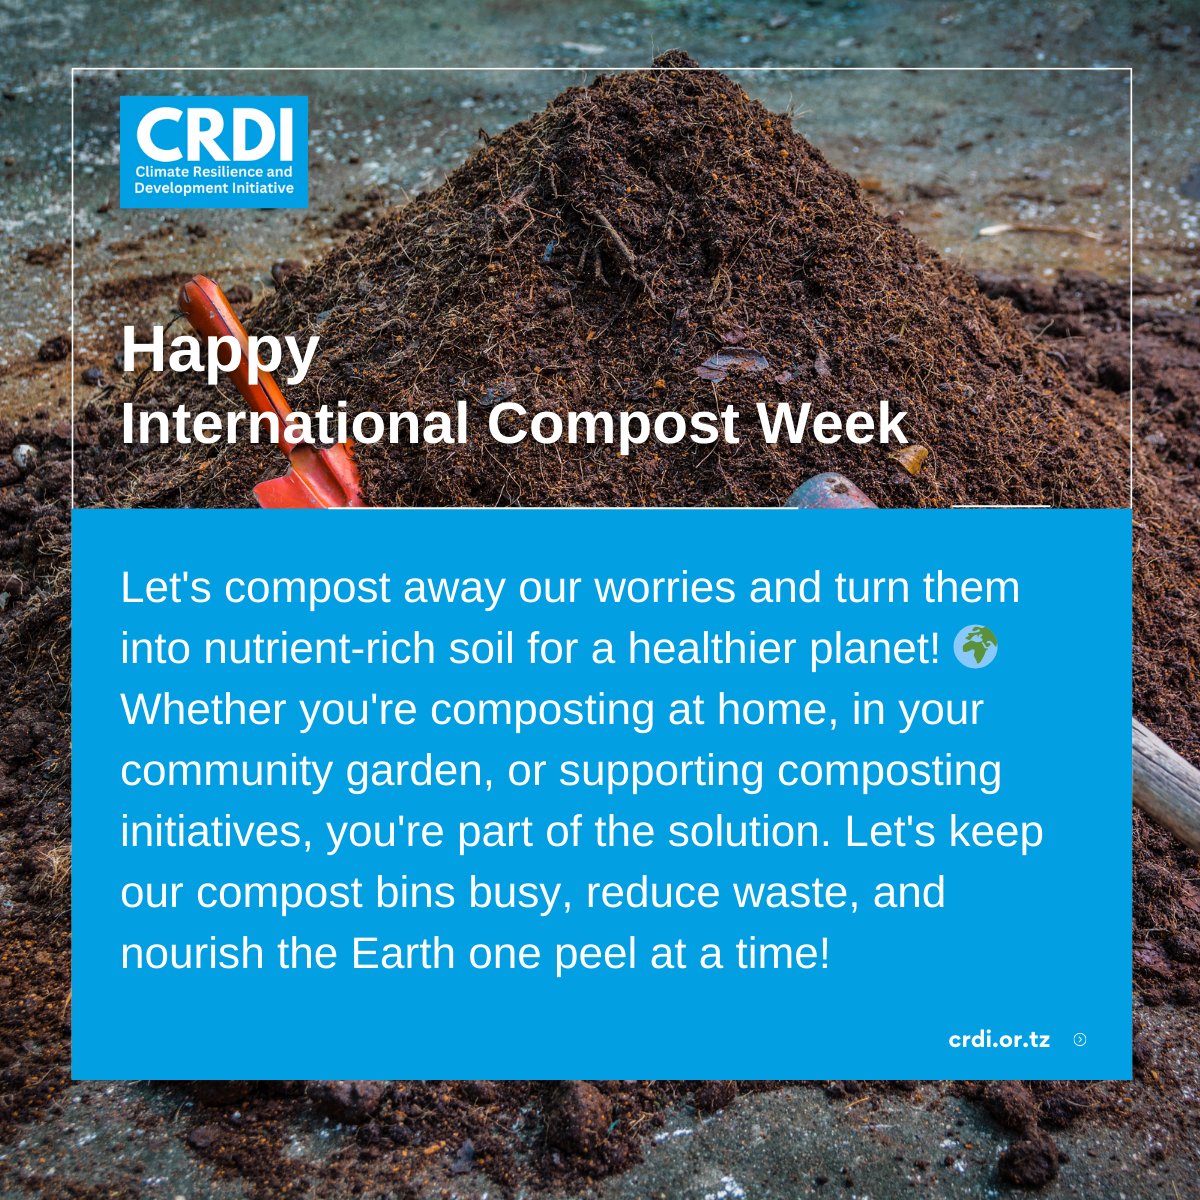 🌱 Celebrating International Compost Week! ♻️ Let's harness the power of composting not just for waste reduction, but also for building climate resilience. Let's compost for a greener, more resilient future! 🌿💧 #CompostWeek #ClimateResilience